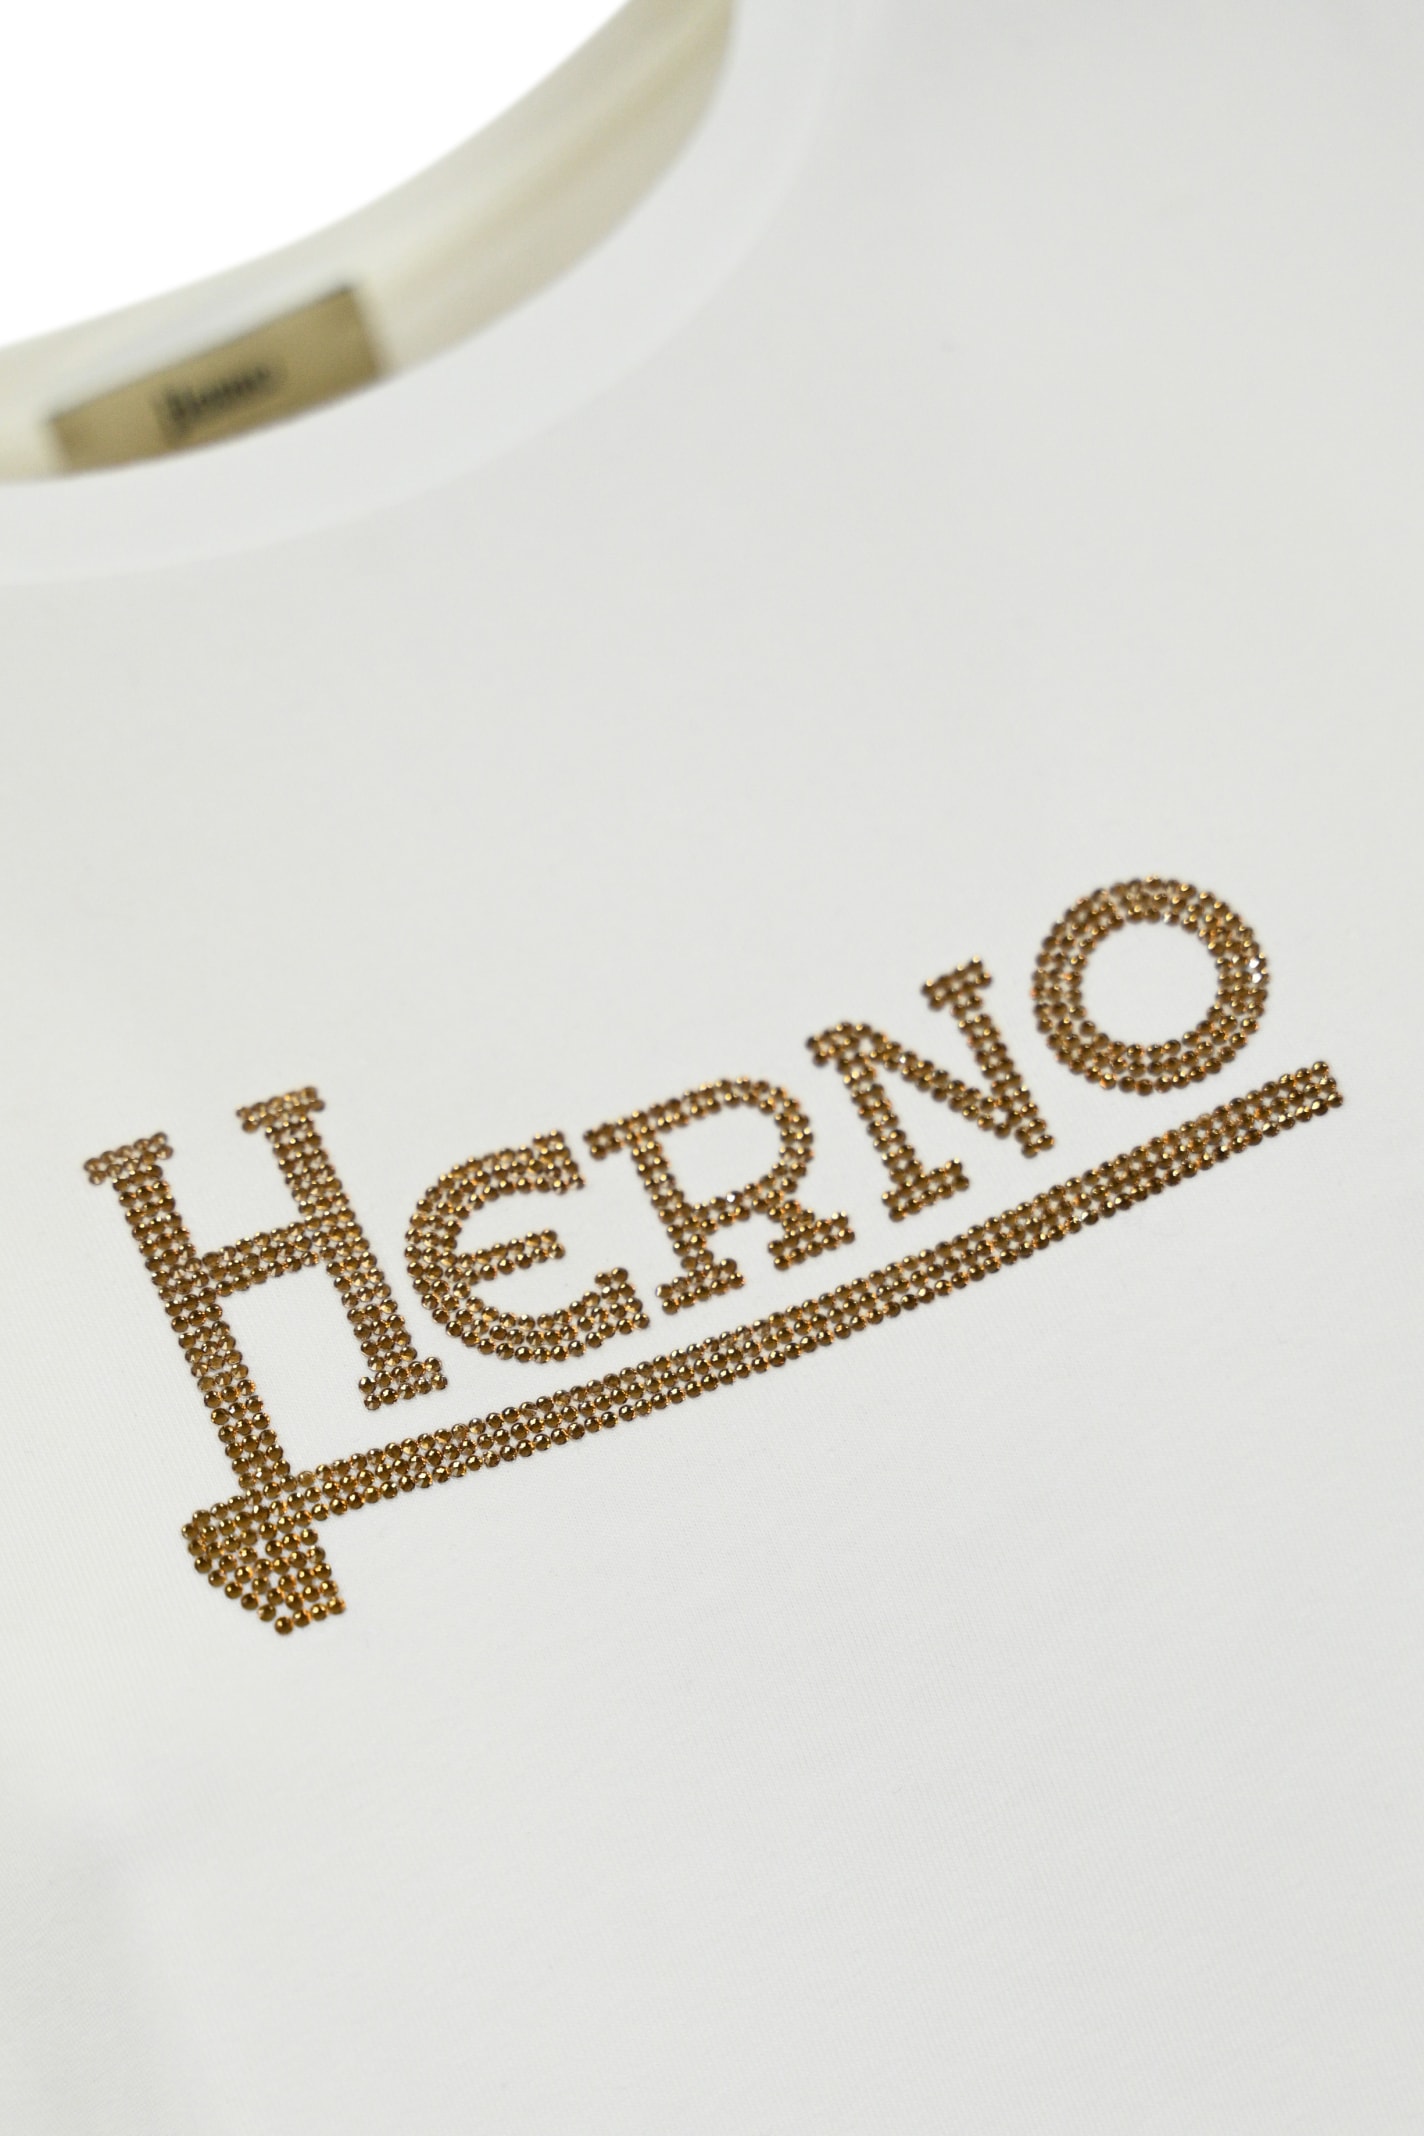 Shop Herno Cotton T-shirt With Logo In Bianco/marrone